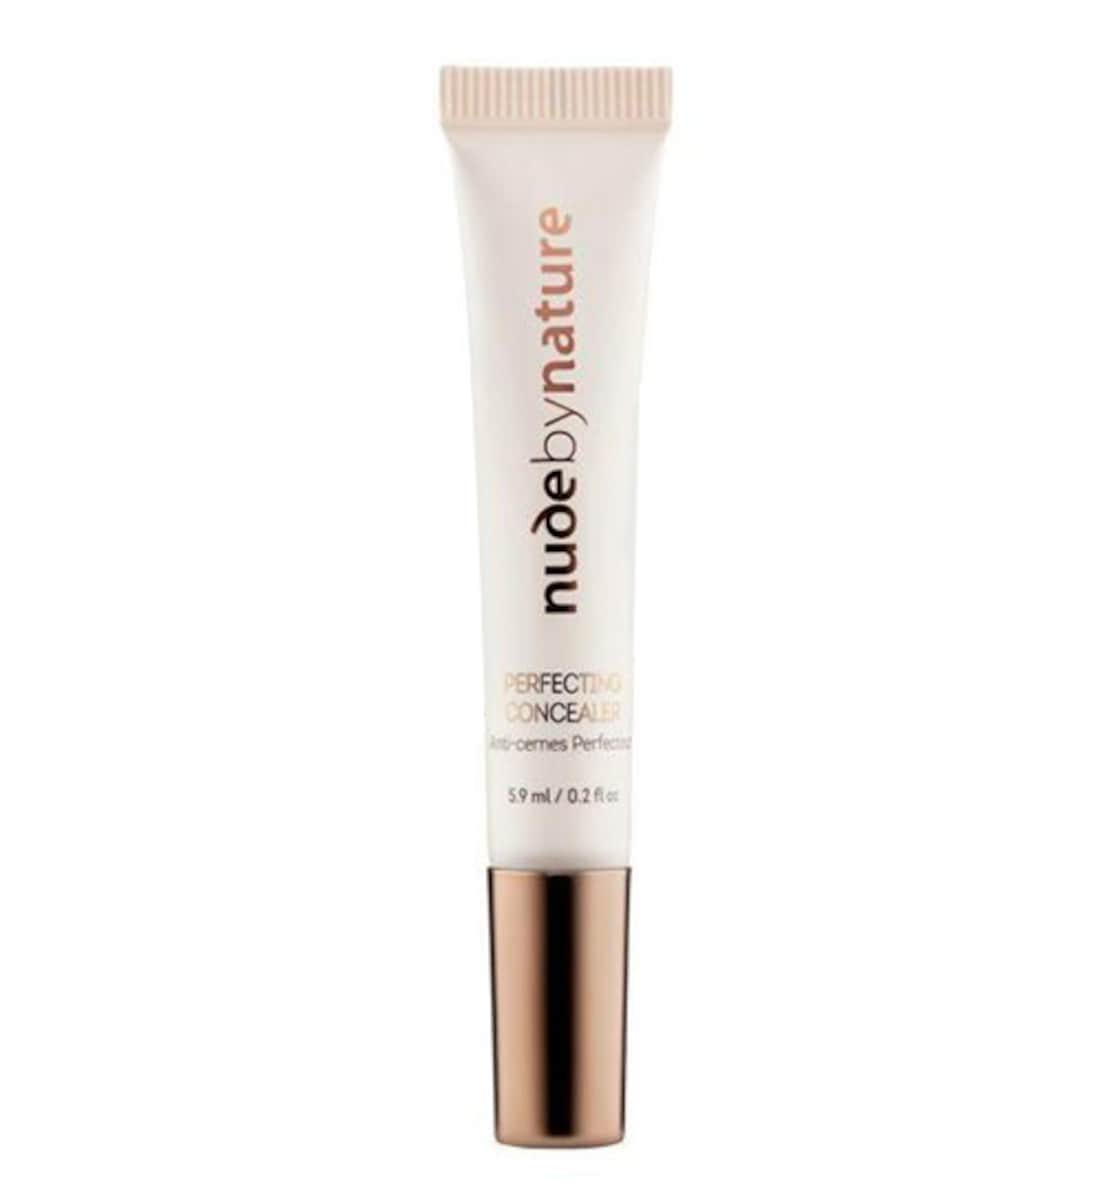 Nude by Nature Perfecting Concealer 02 Porcelain Beige